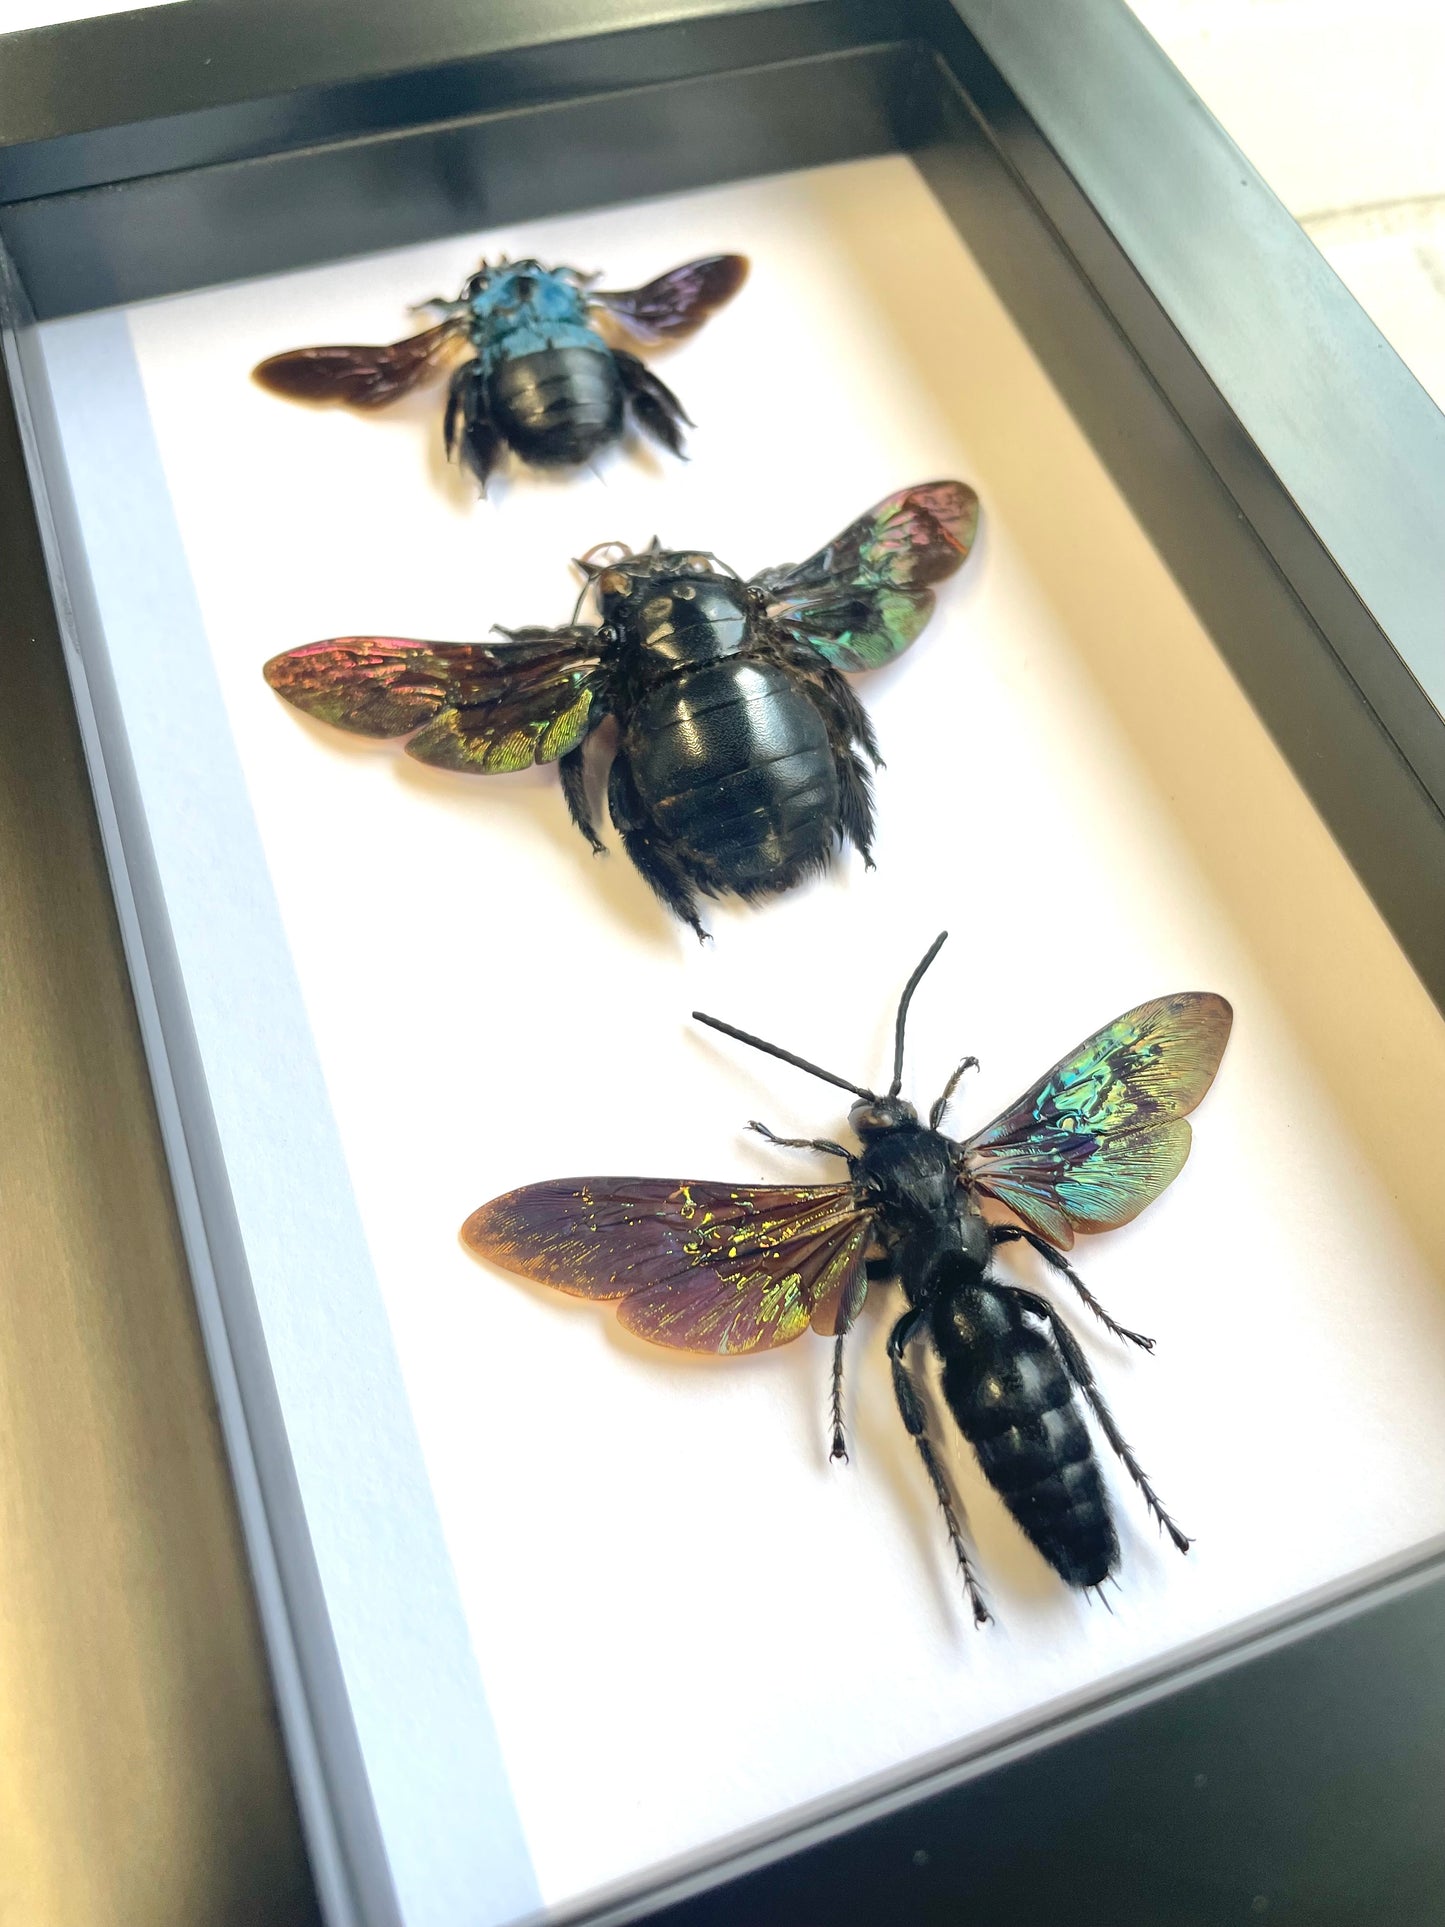 Hymenoptera Collection Giant Scoliid Wasp Blue Carpenter Bee Deep Shadow Box Frame Display Insect Bug